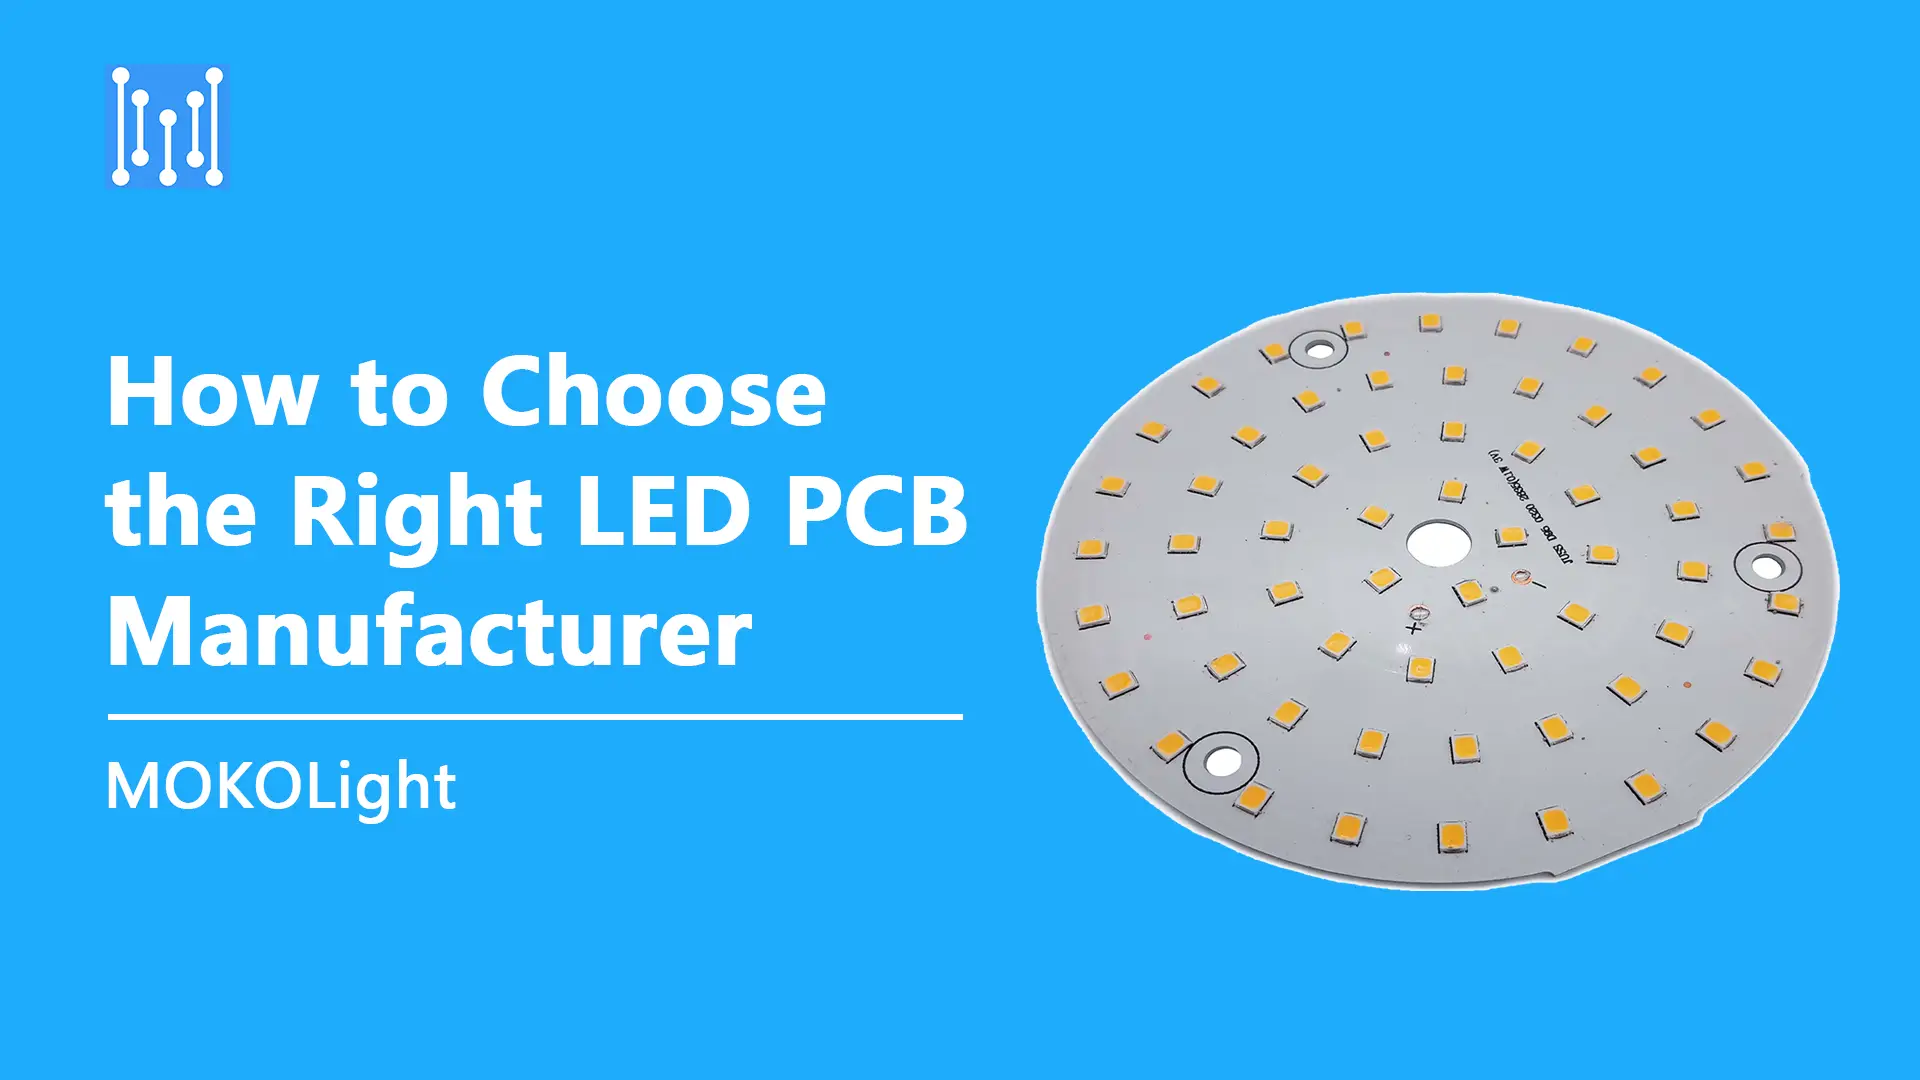 How to Choose the Right LED PCB Manufacturer